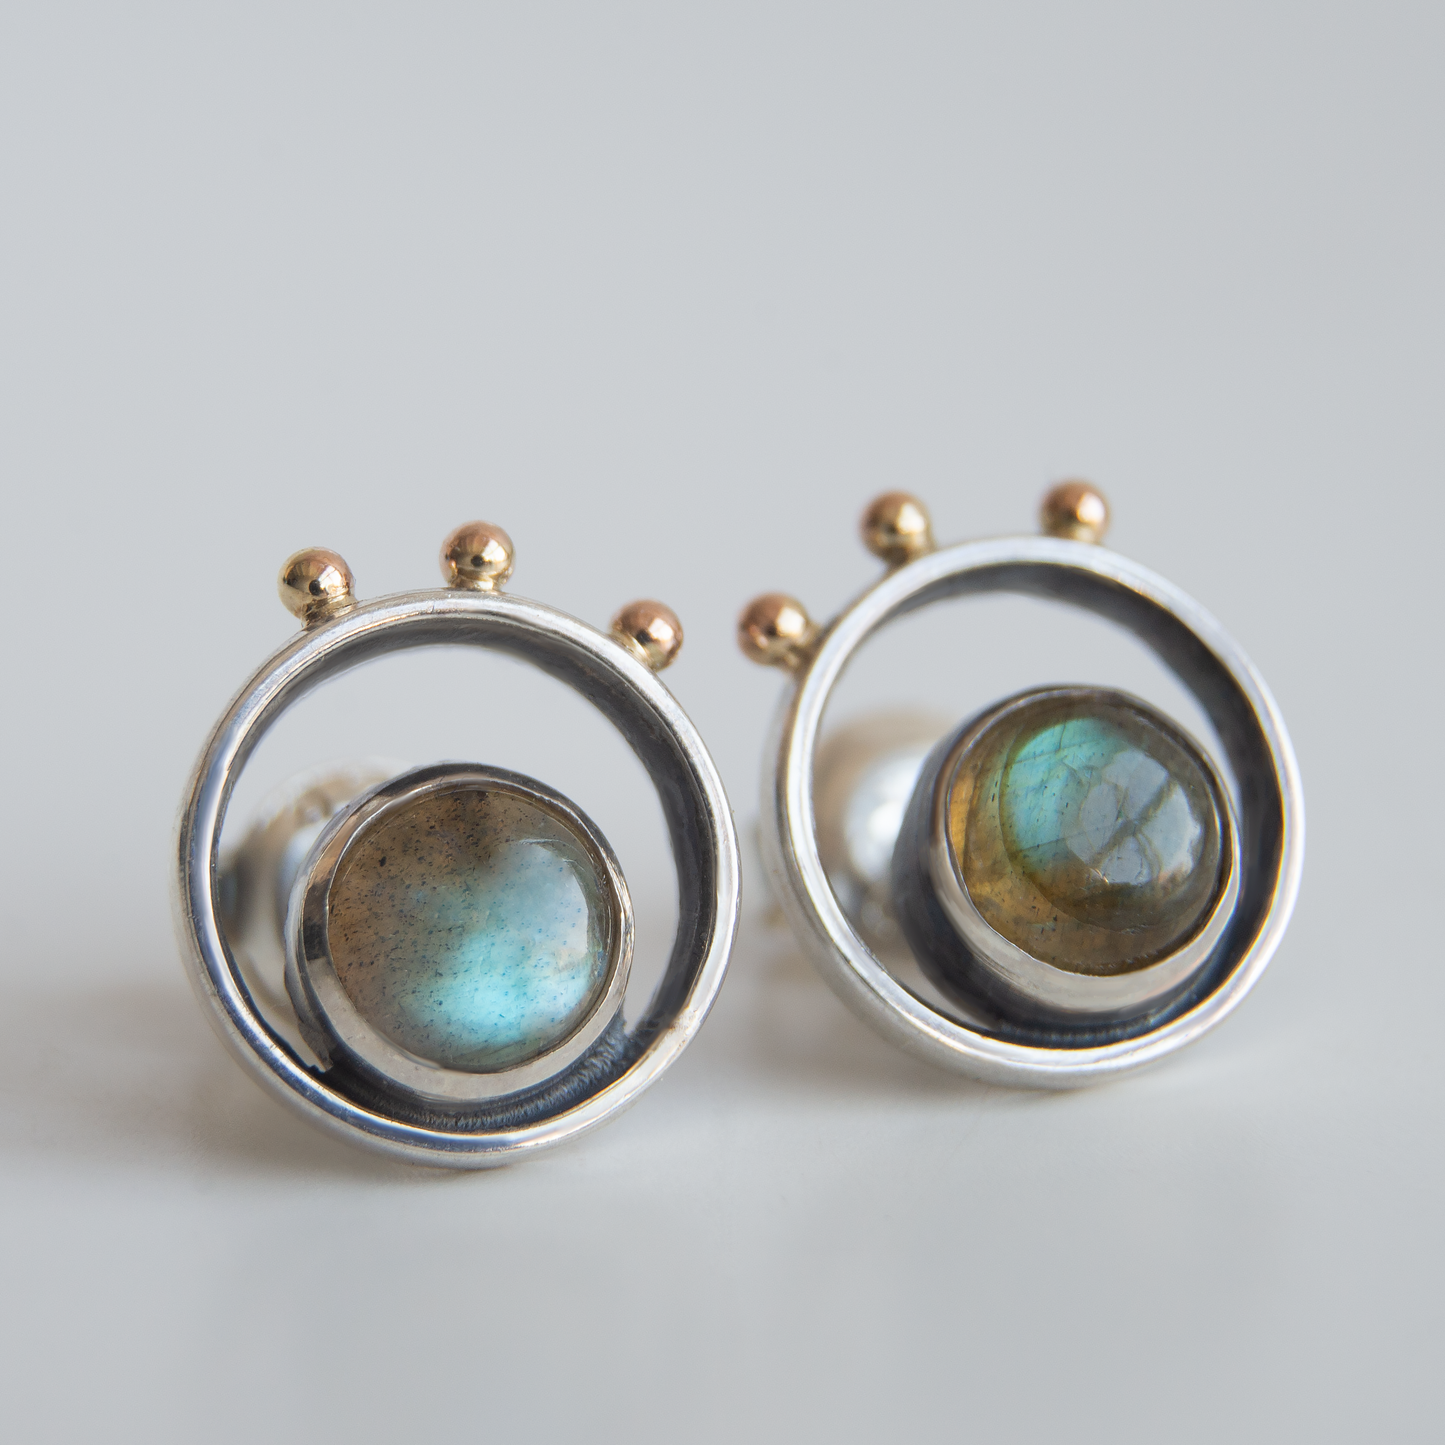 Labradorite Frame Earrings With Gold Beads